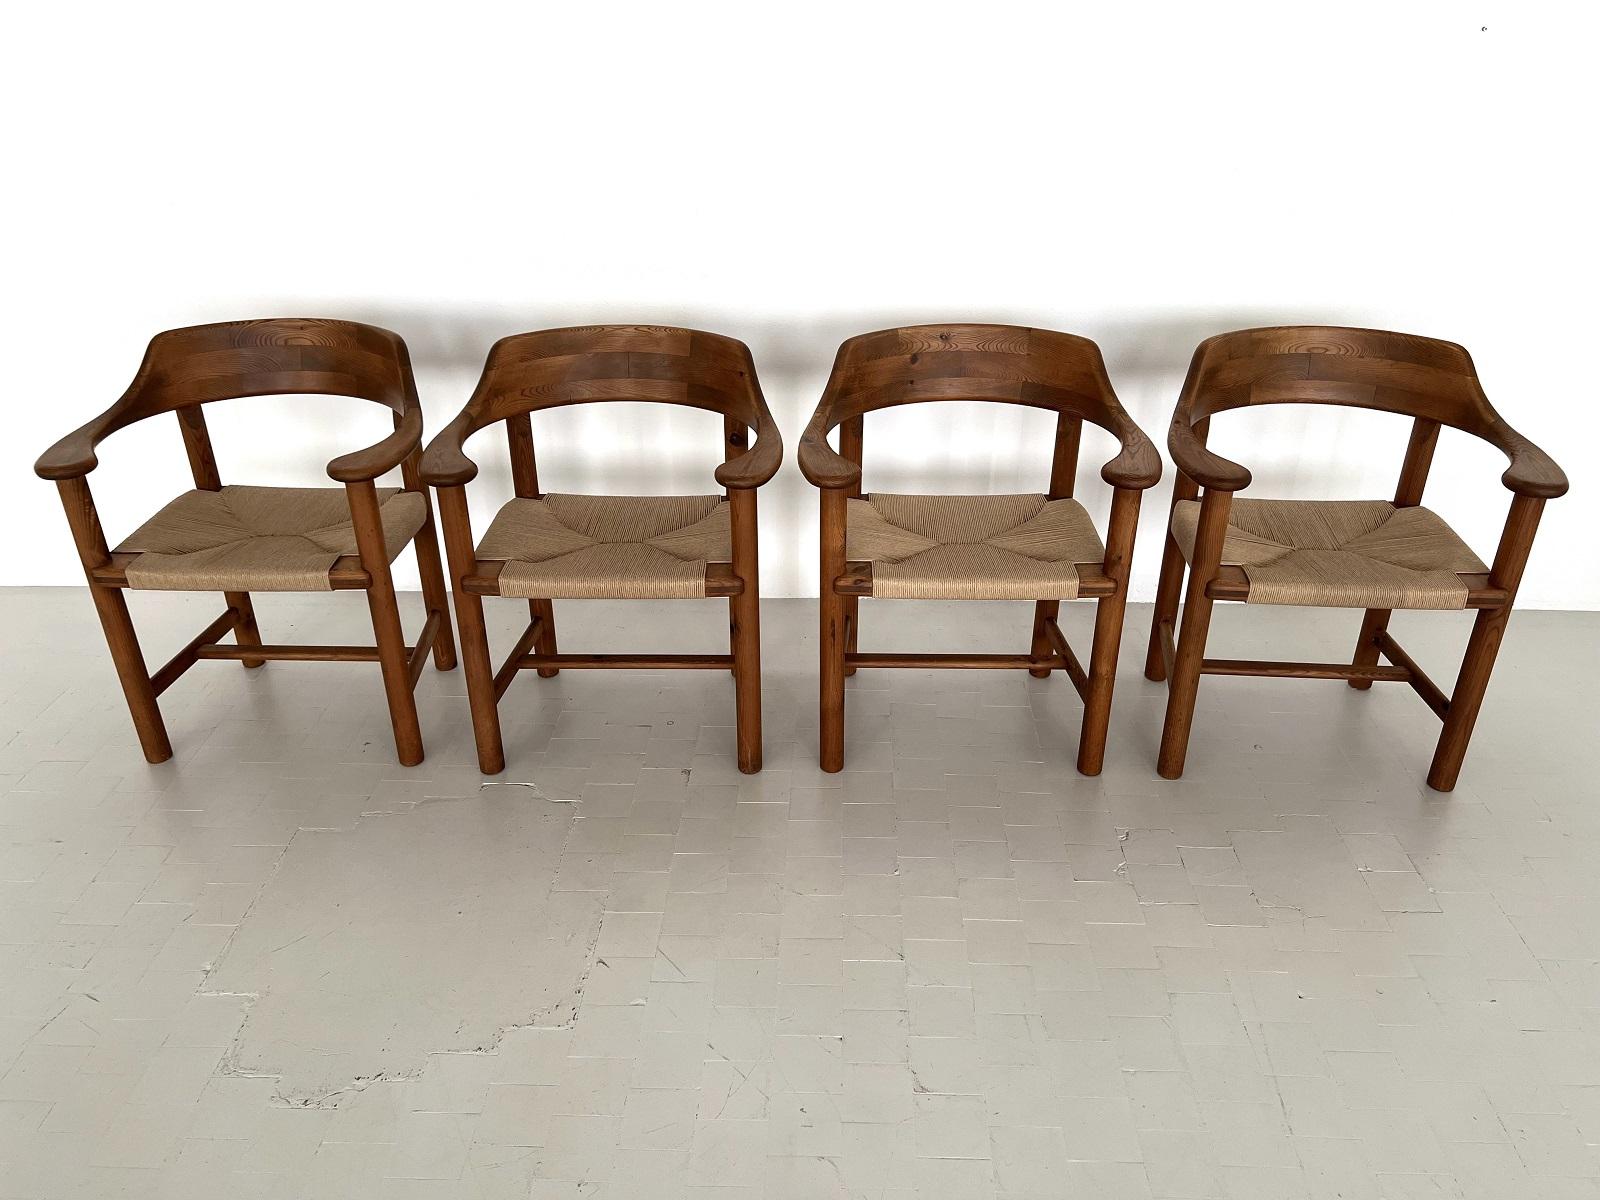 Rainer Daumiller Dining Chairs in Pine and New Paper Cord, 1970s For Sale 5